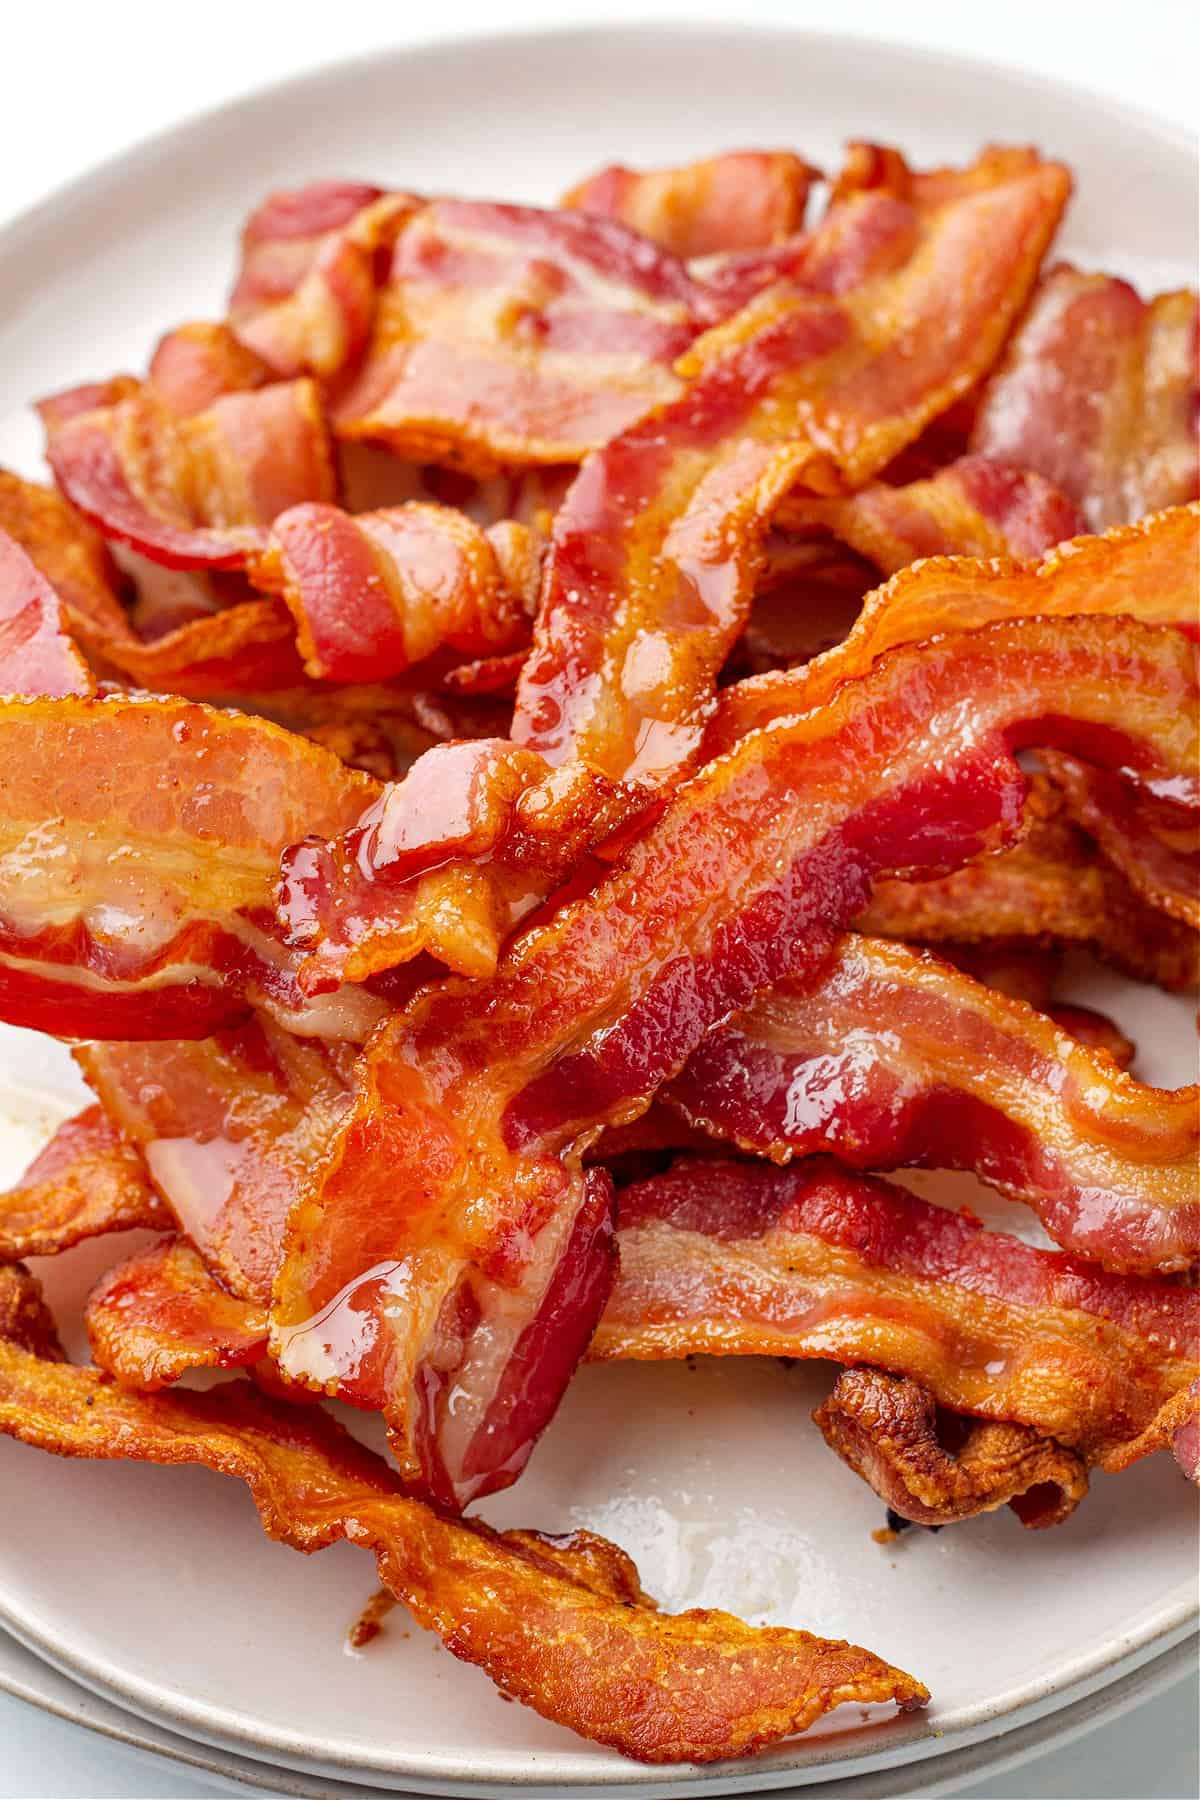 A pile of cooked bacon on a plate.